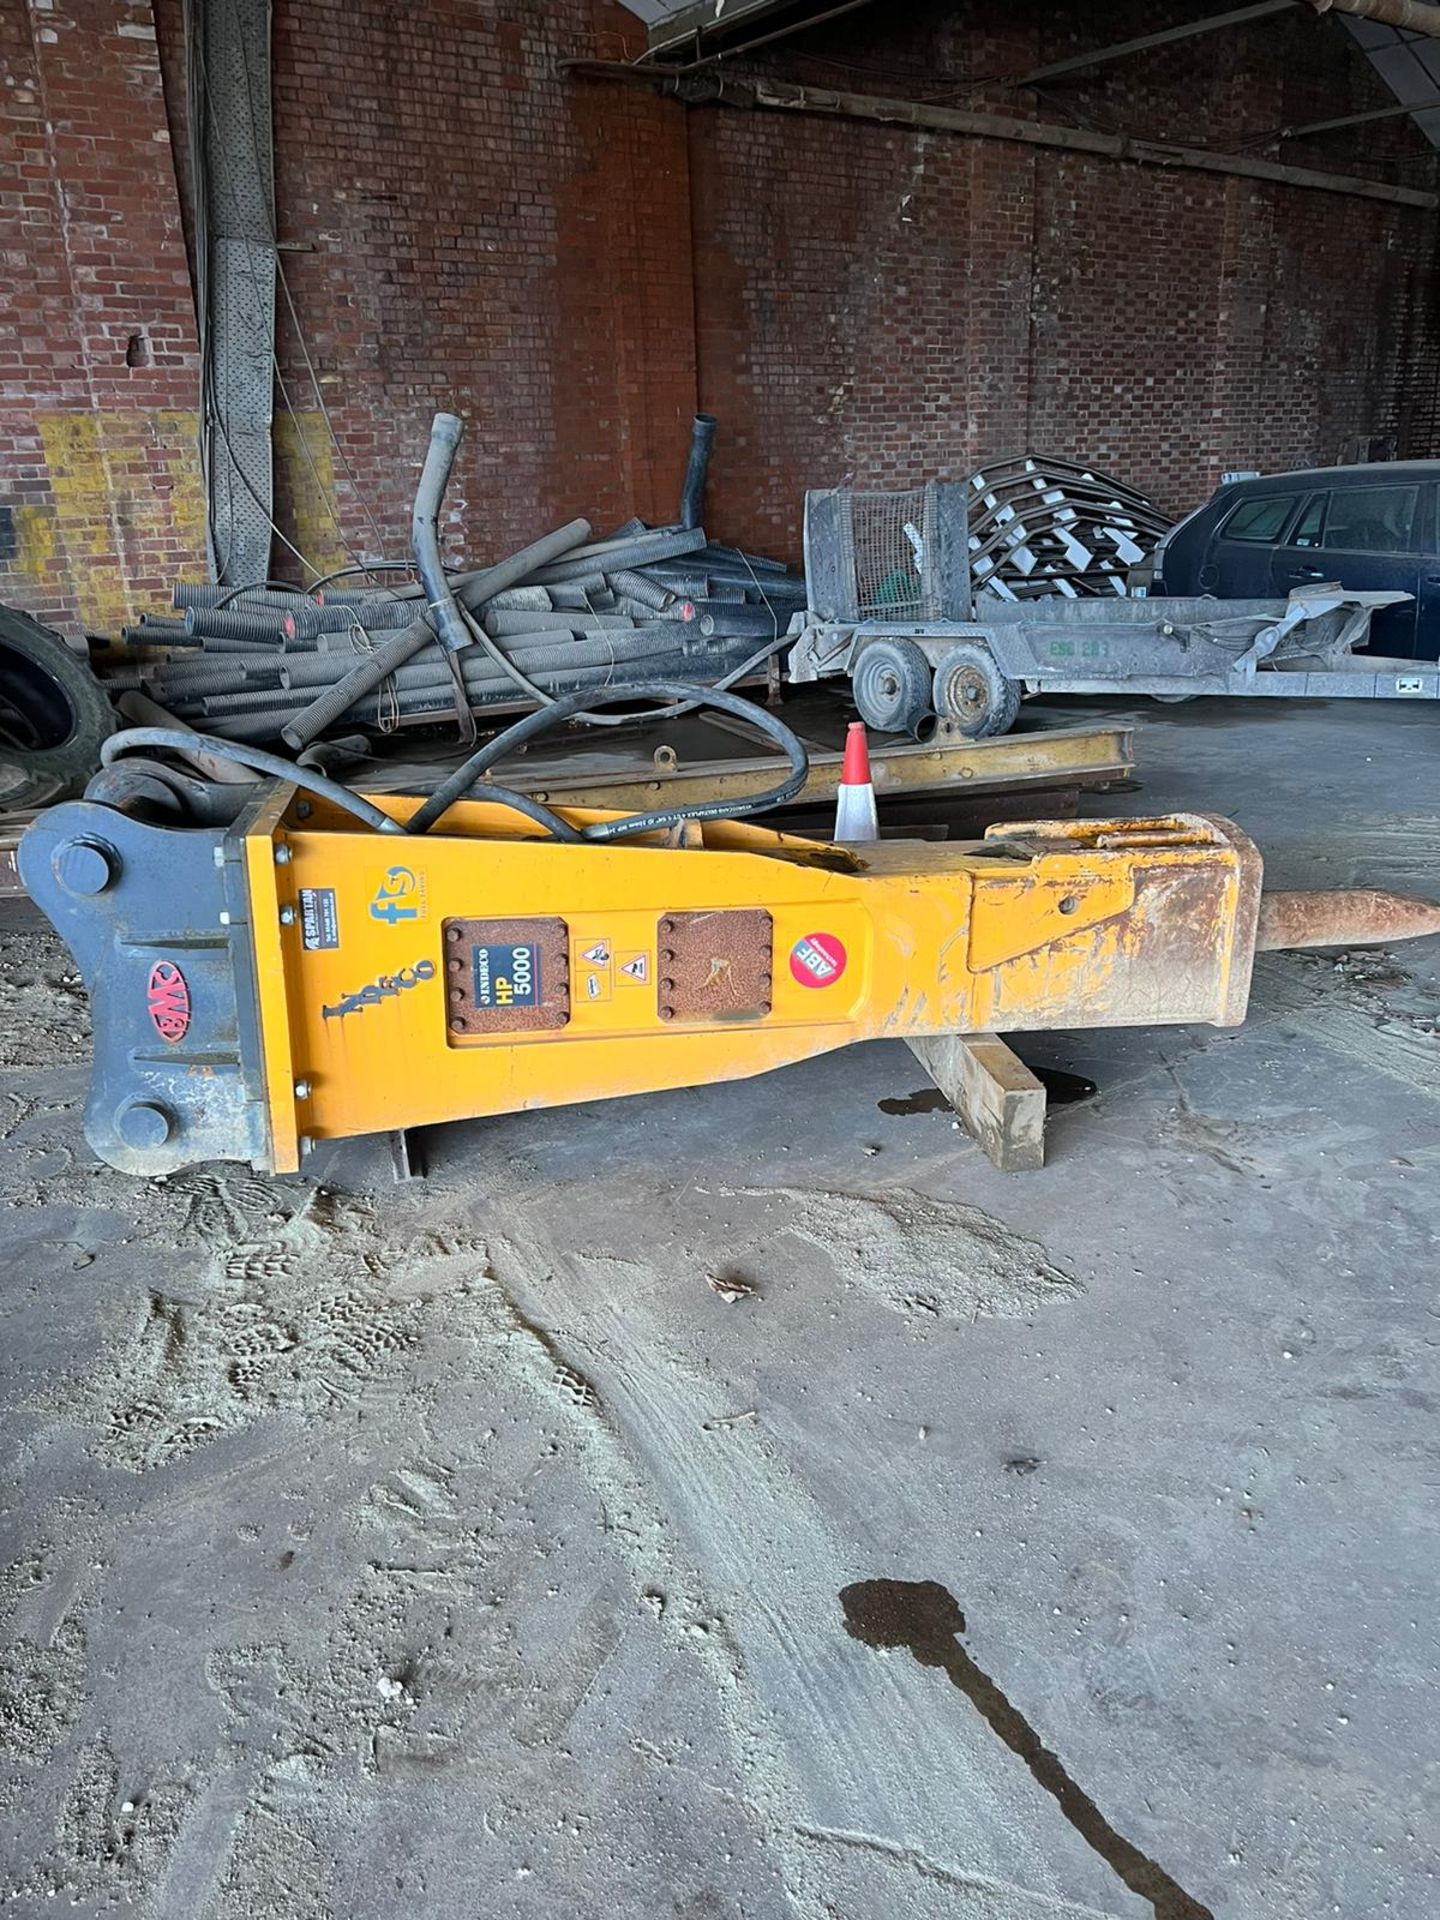 INDECO HAMMER 40 TON BREAKER - VERY LITTLE USE - 2021 YEAR